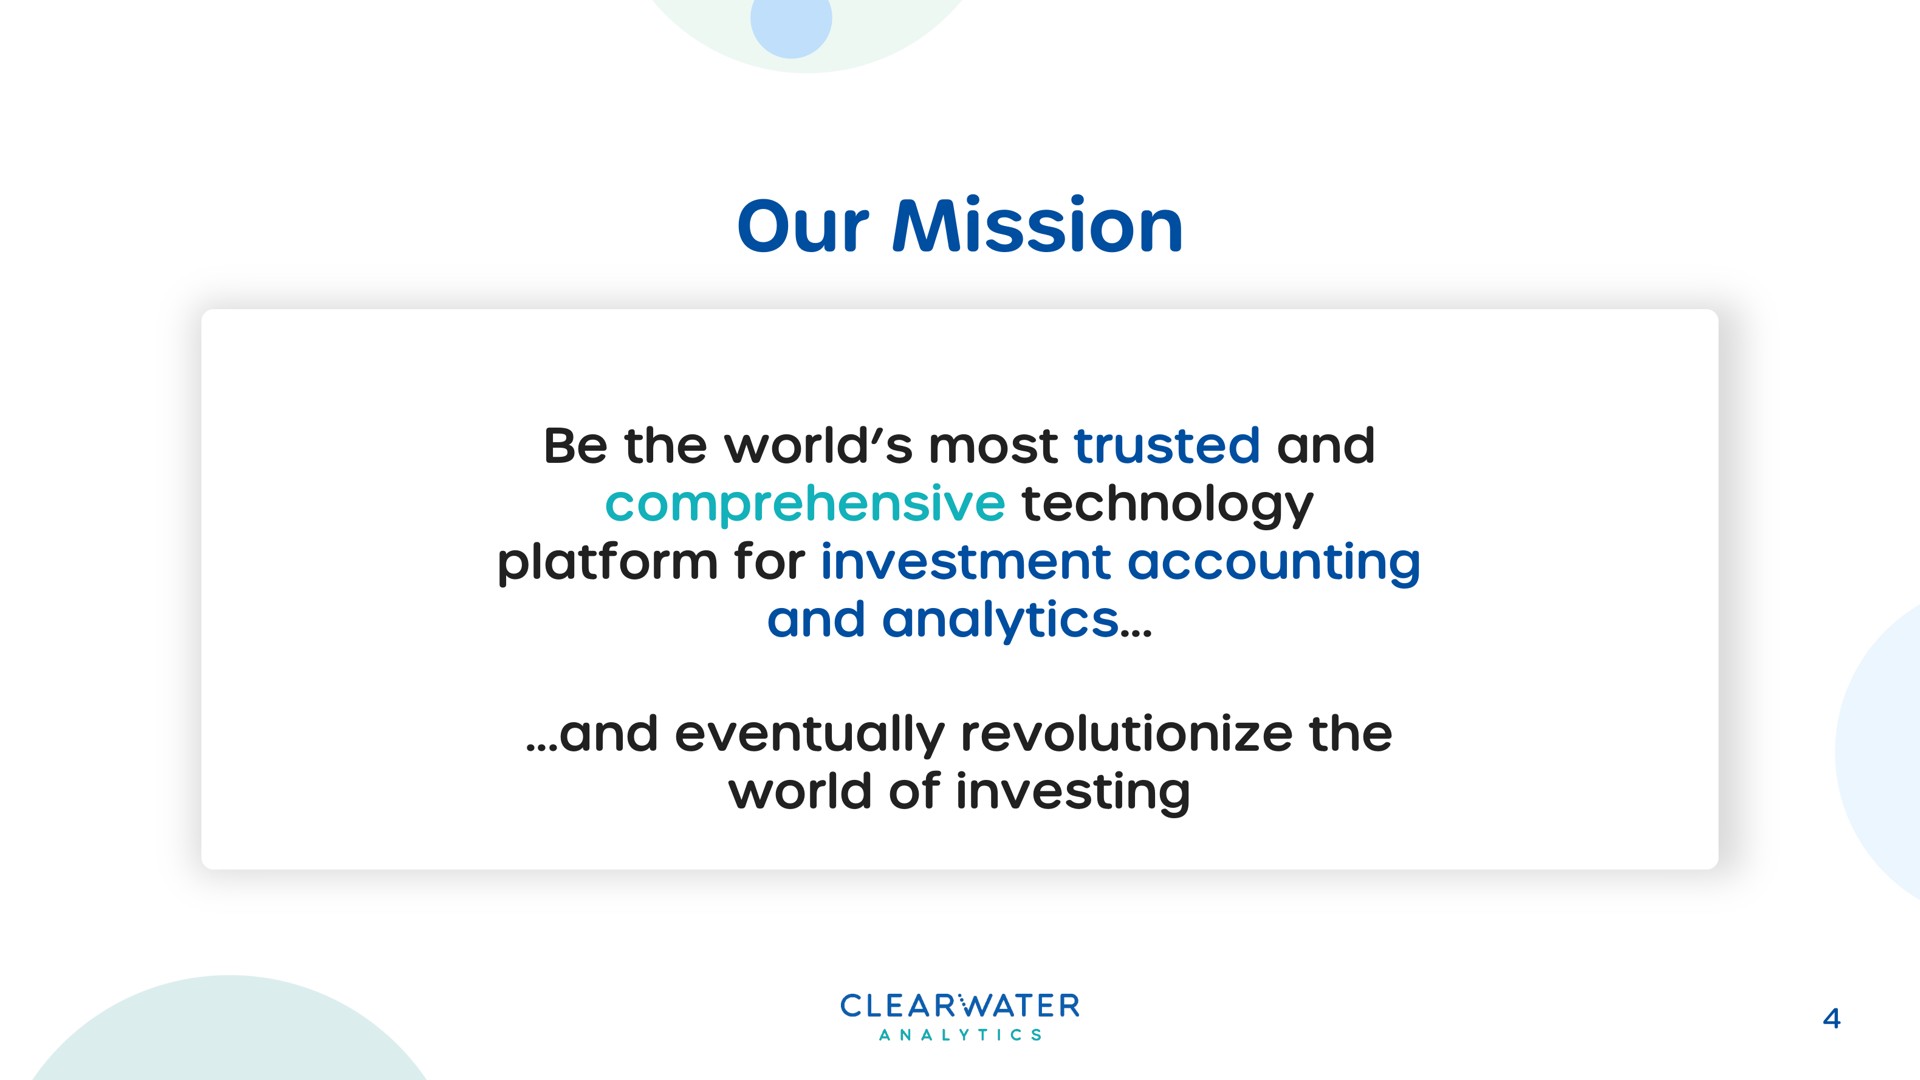 our mission be the world most trusted and comprehensive technology platform for investment accounting and analytics and eventually revolutionize the world of investing | Clearwater Analytics